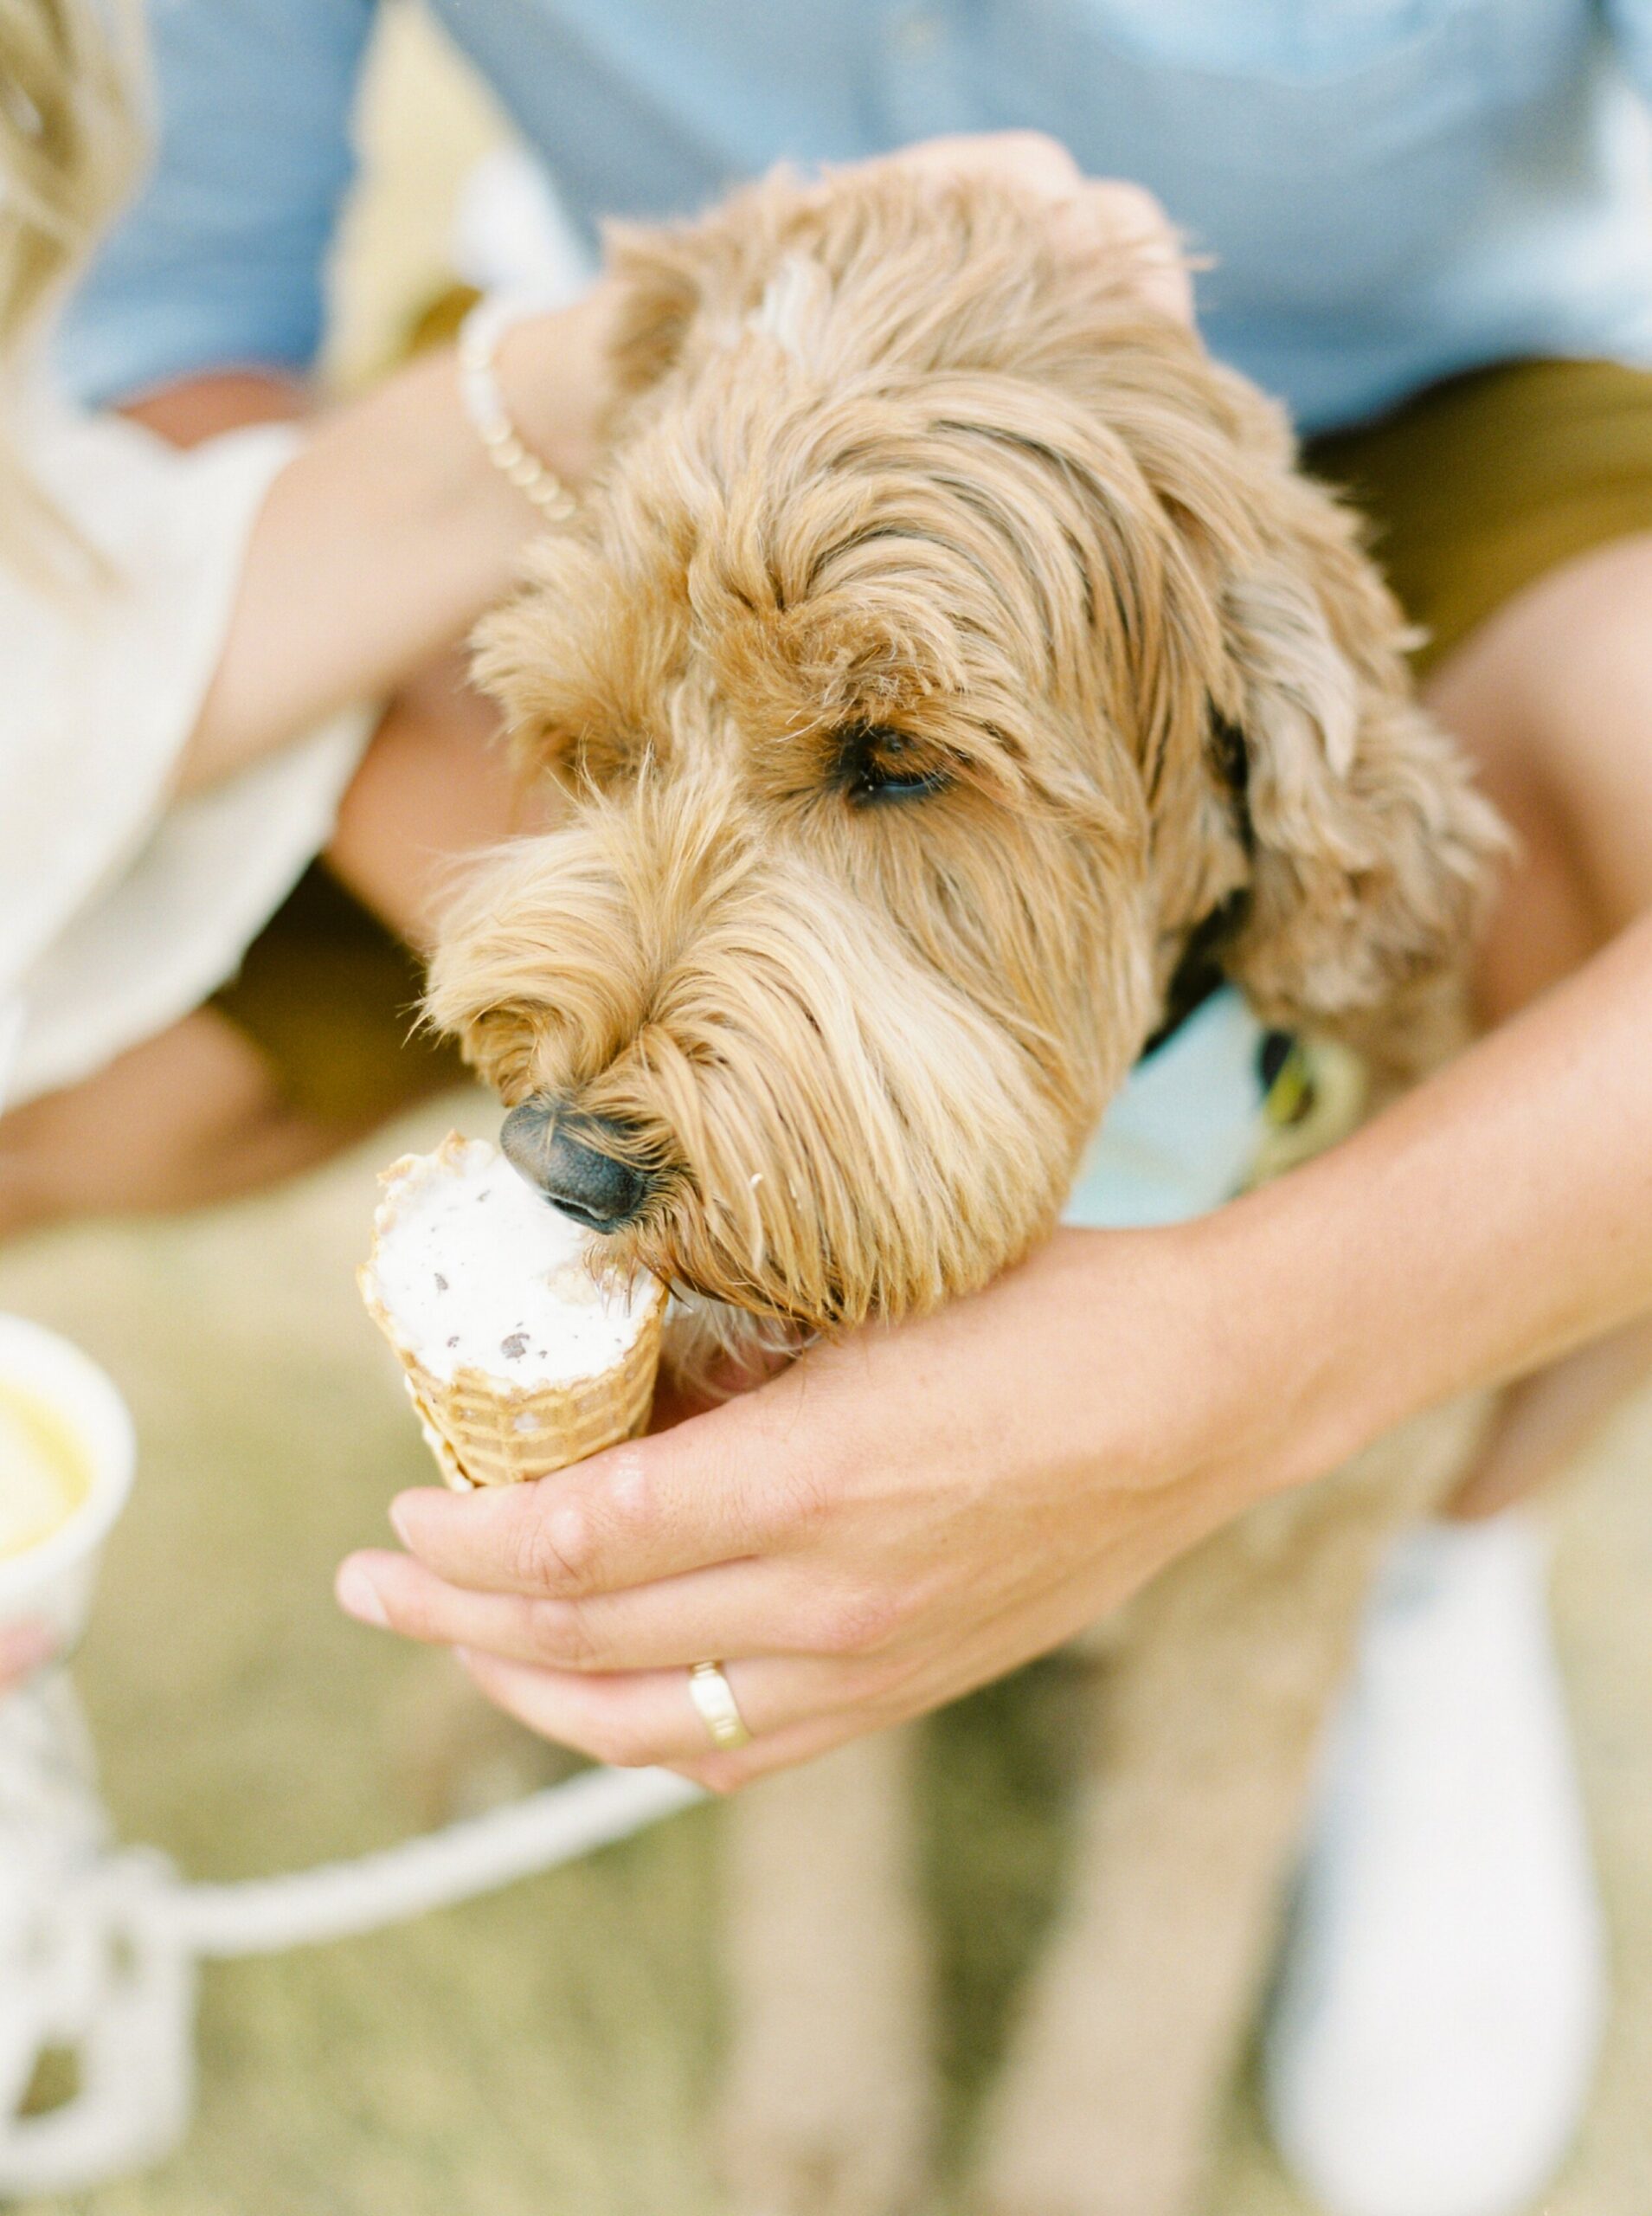  Couples session date night ice cream and a dog walk at the beach | adventure session | golden doodle photo shoot | Justine Milton fine art film photographer portra 400 